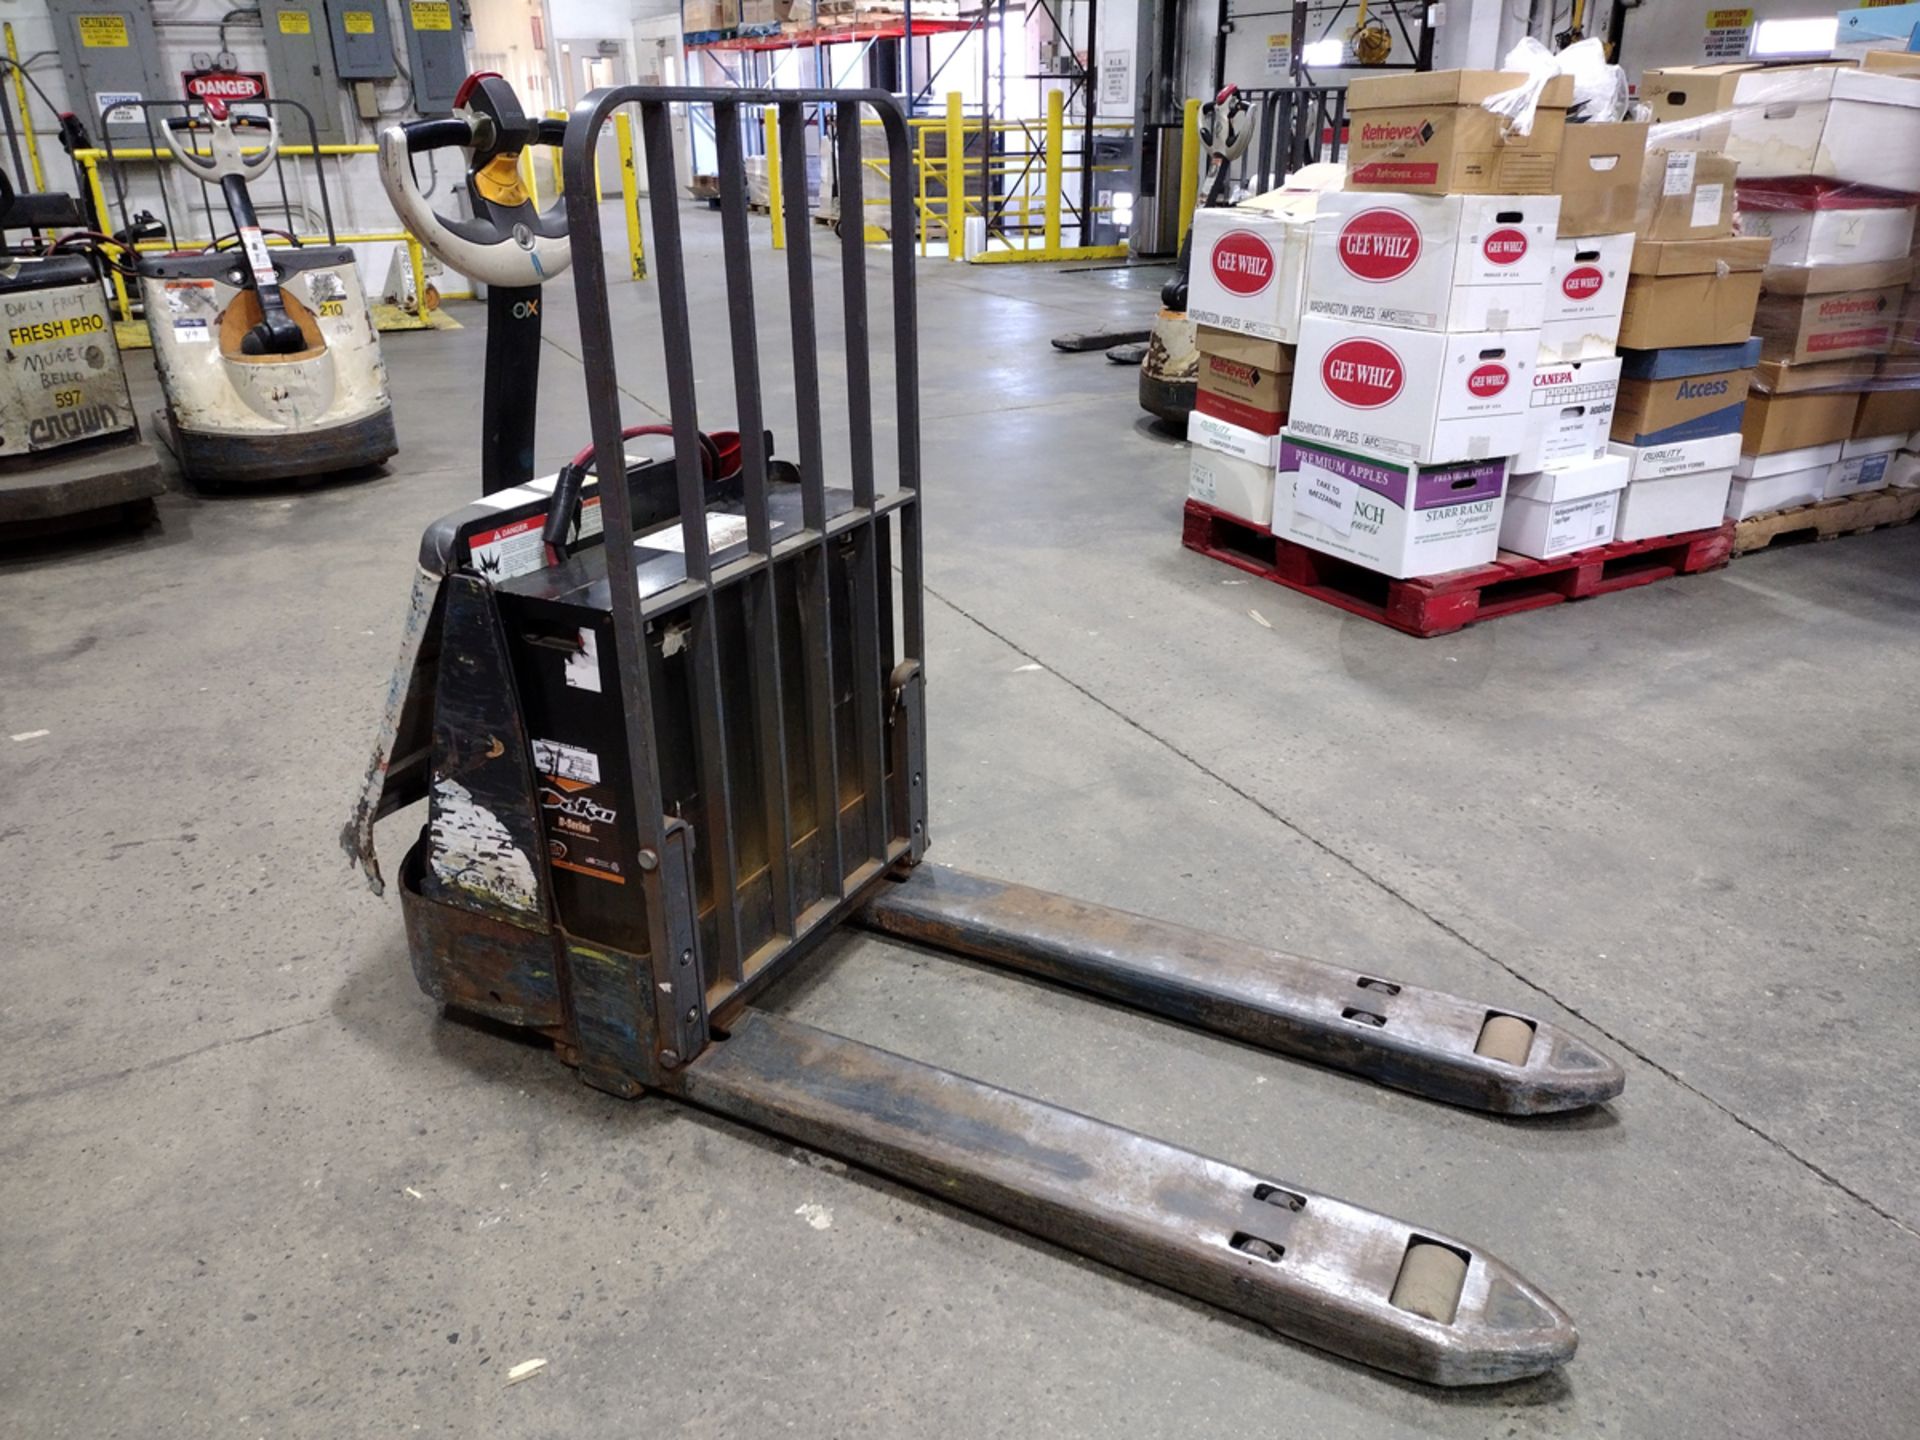 Crown WP3045-45 4,500lbs Electric 24V Walk-Behind Pallet Jack With Charger